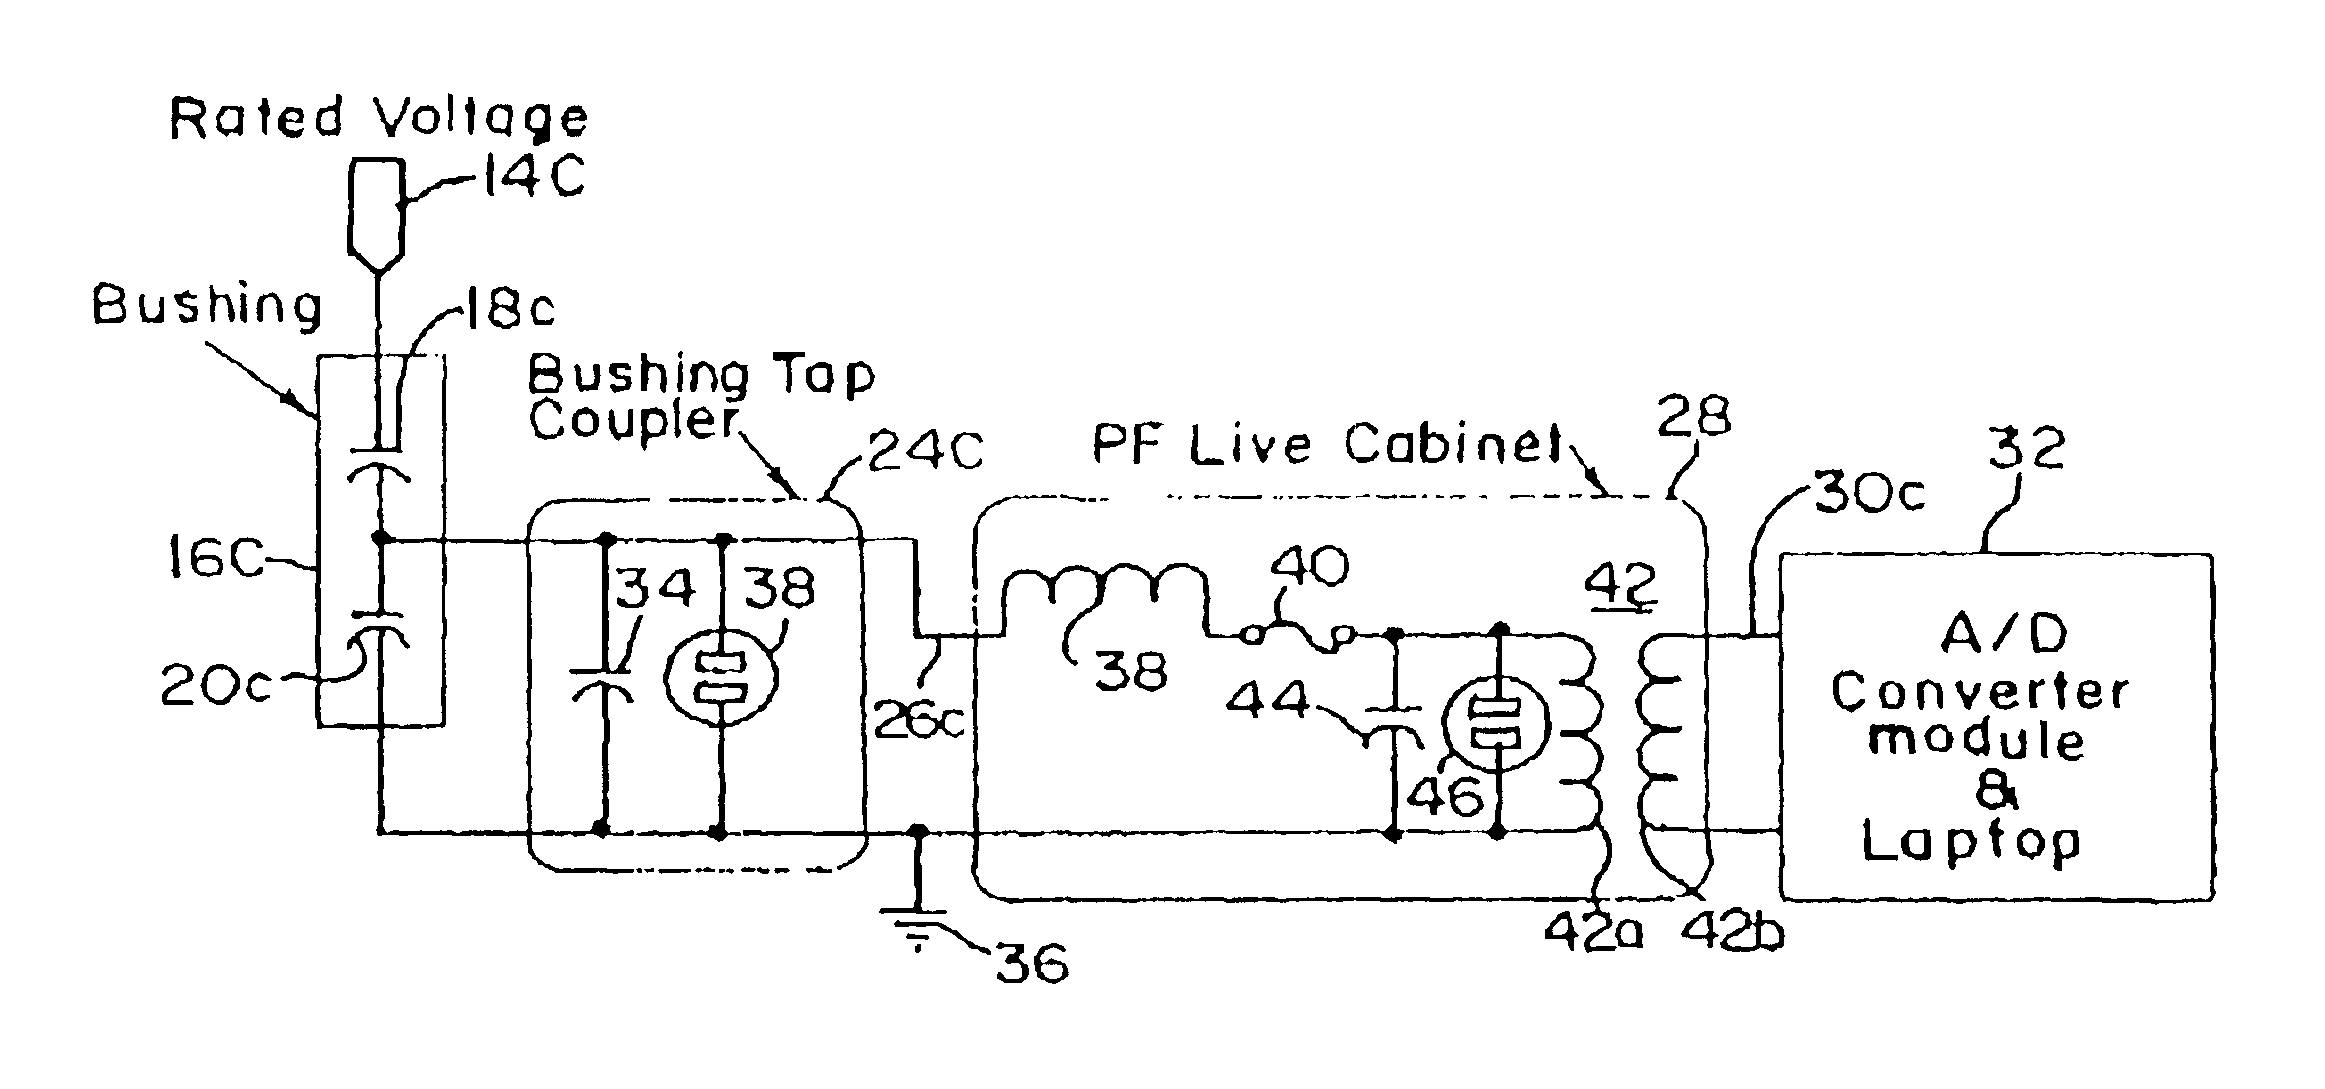 Power factor/tan deltatesting of high voltage bushings on power transformers, current transformers, and circuit breakers